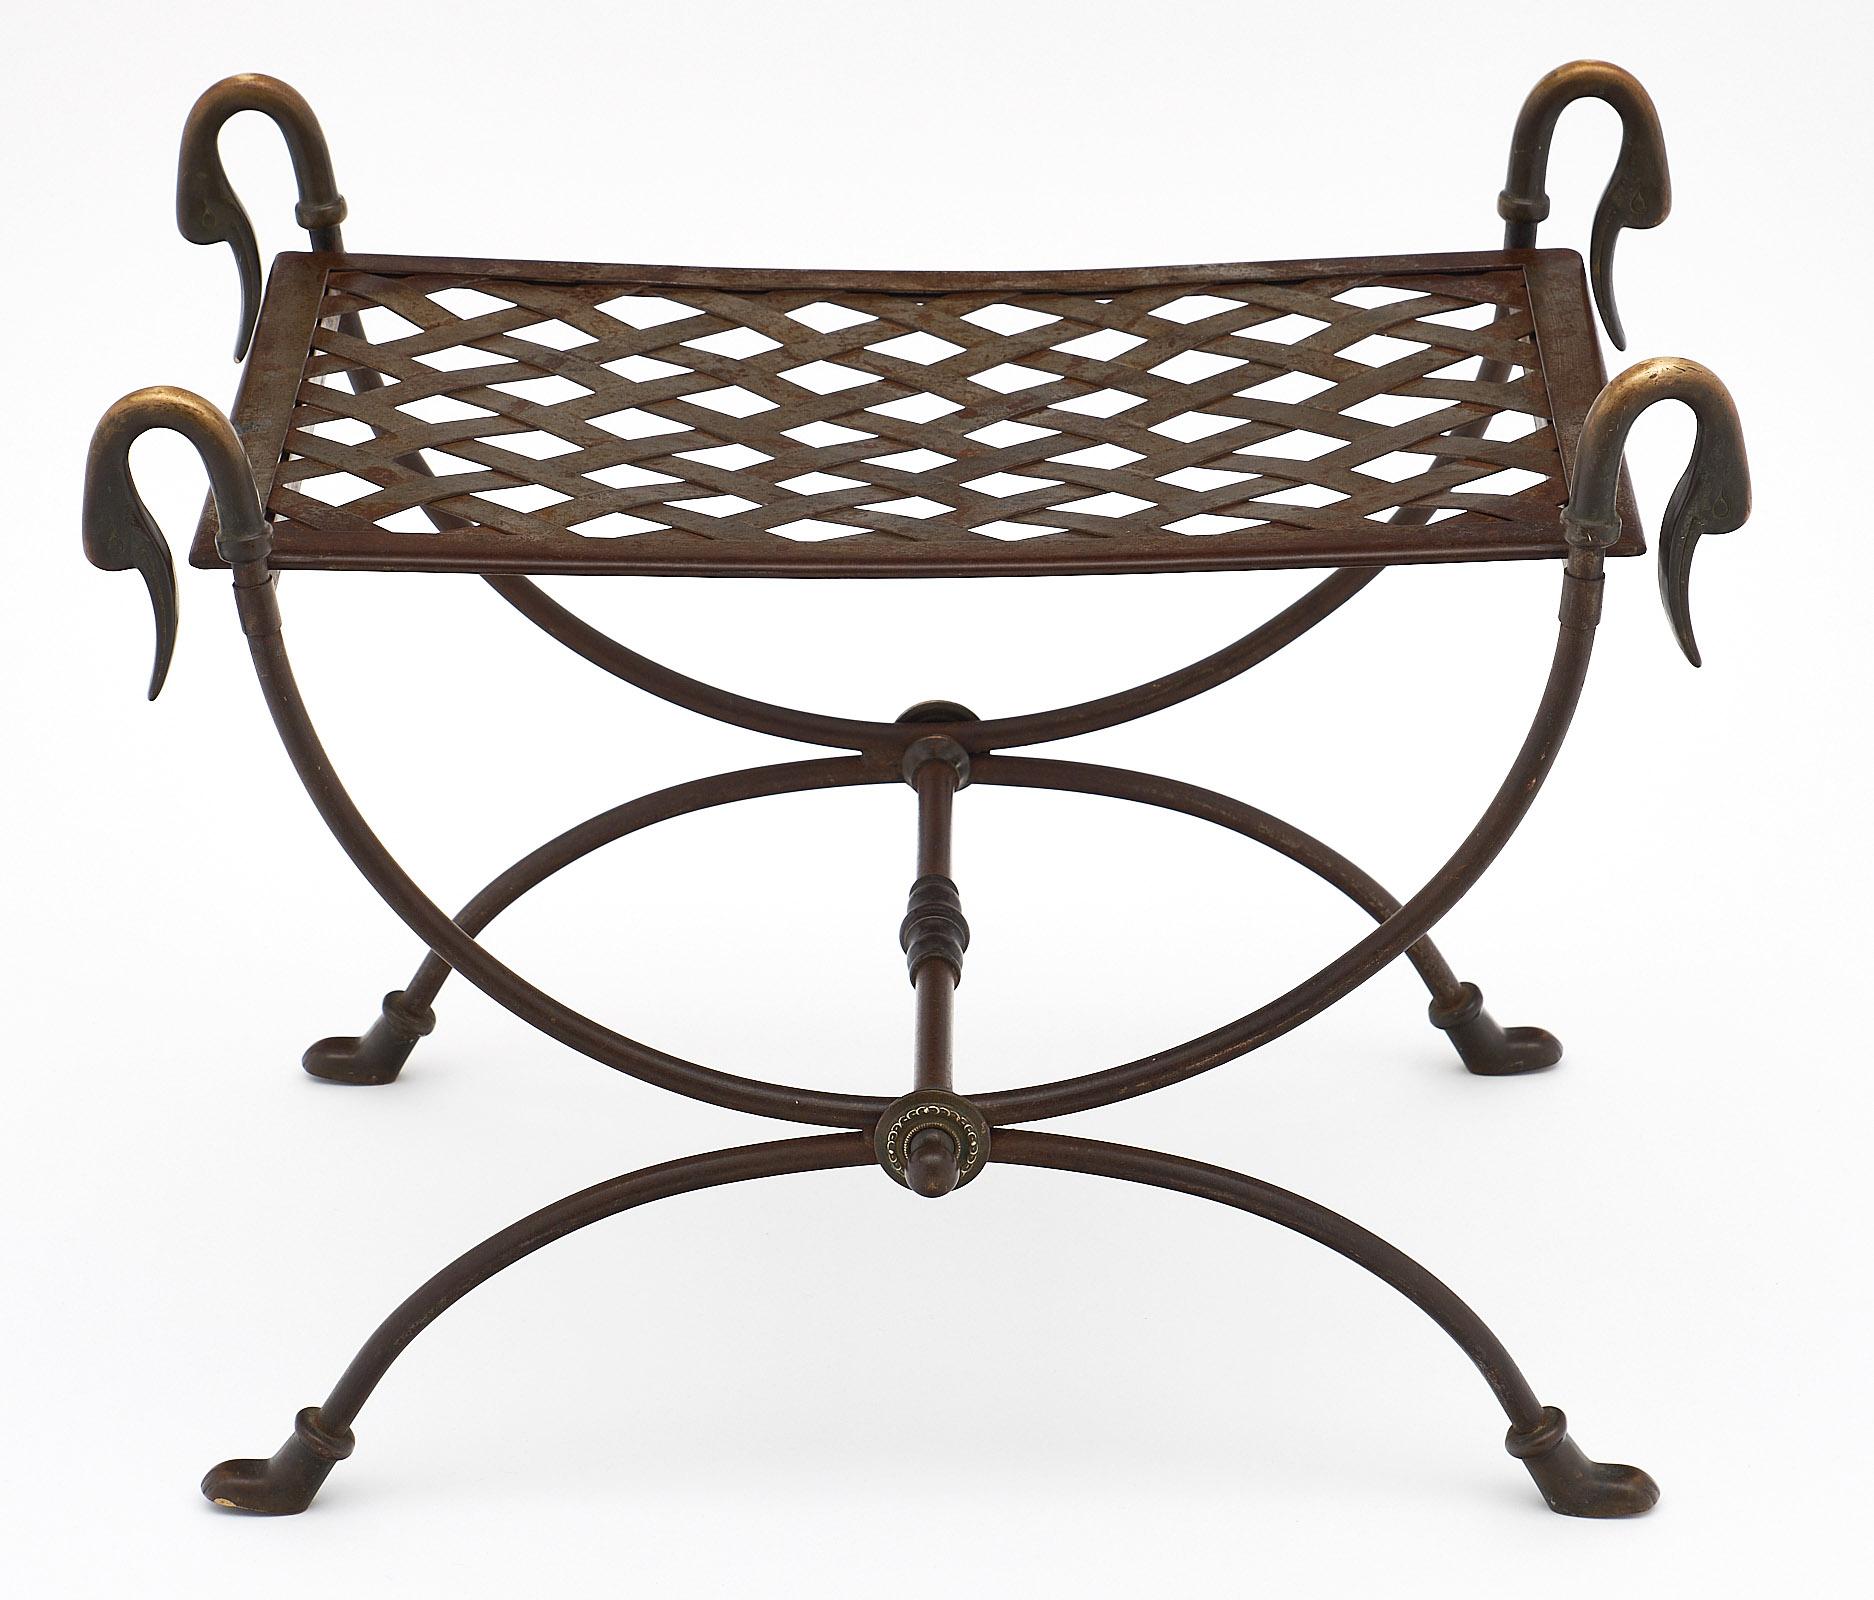 Bronze and steel antique swan stool. This French piece is made of hand-hammered steel with bronze legs and bronze swan necks. We love the elegant curves of the Curule shape.